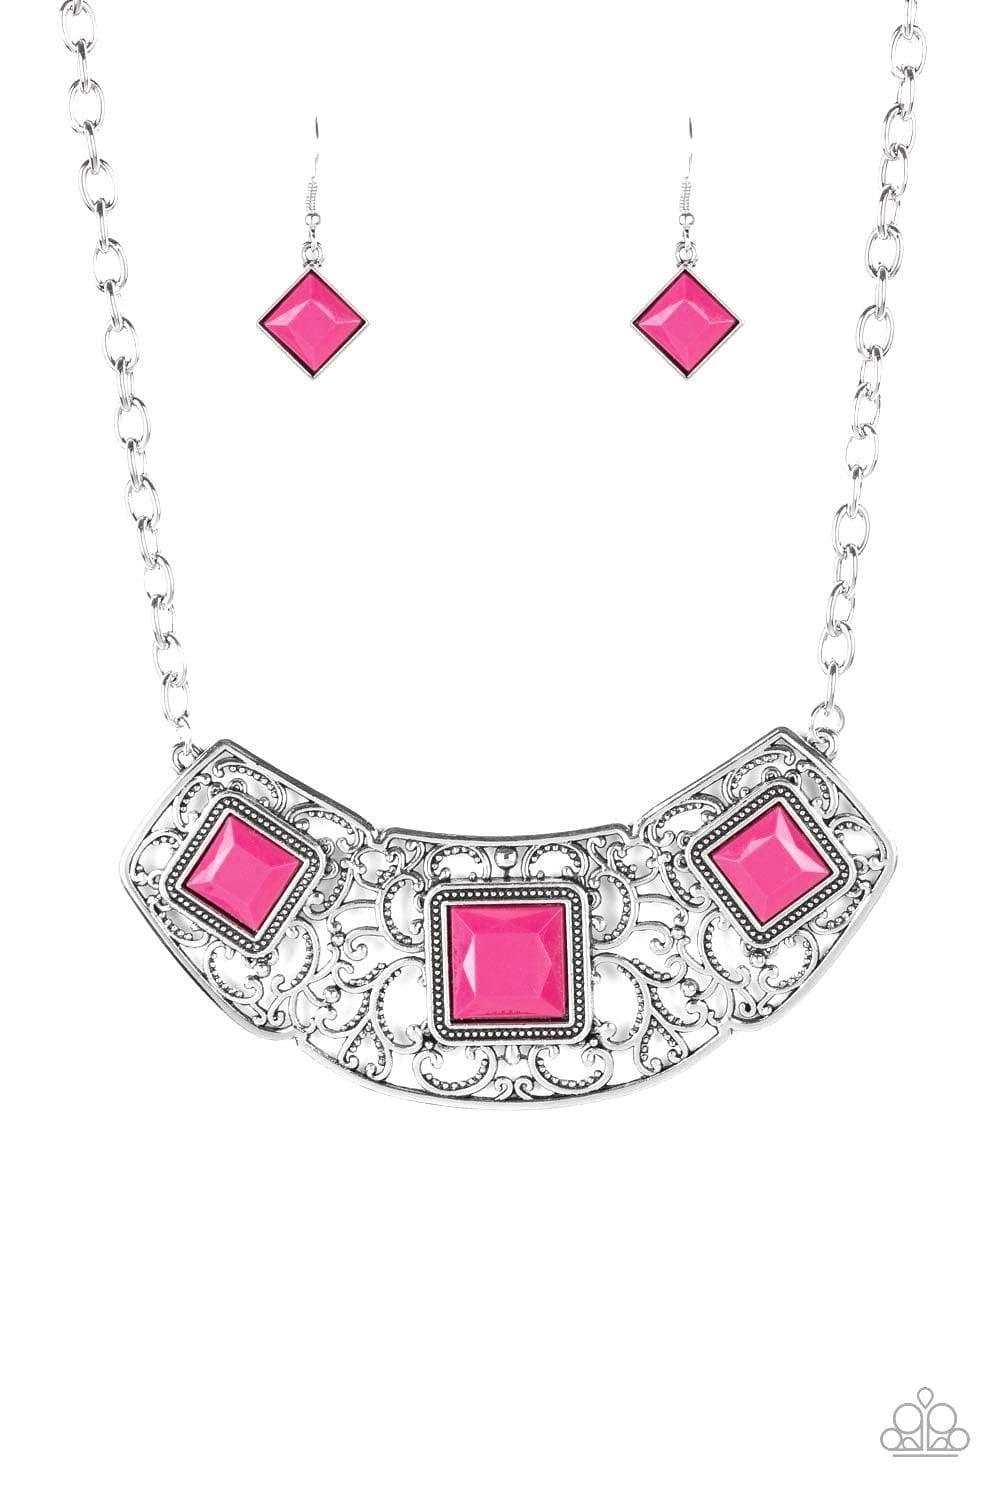 Paparazzi Accessories - Feeling Inde-pendant - Pink Necklace - Bling by JessieK